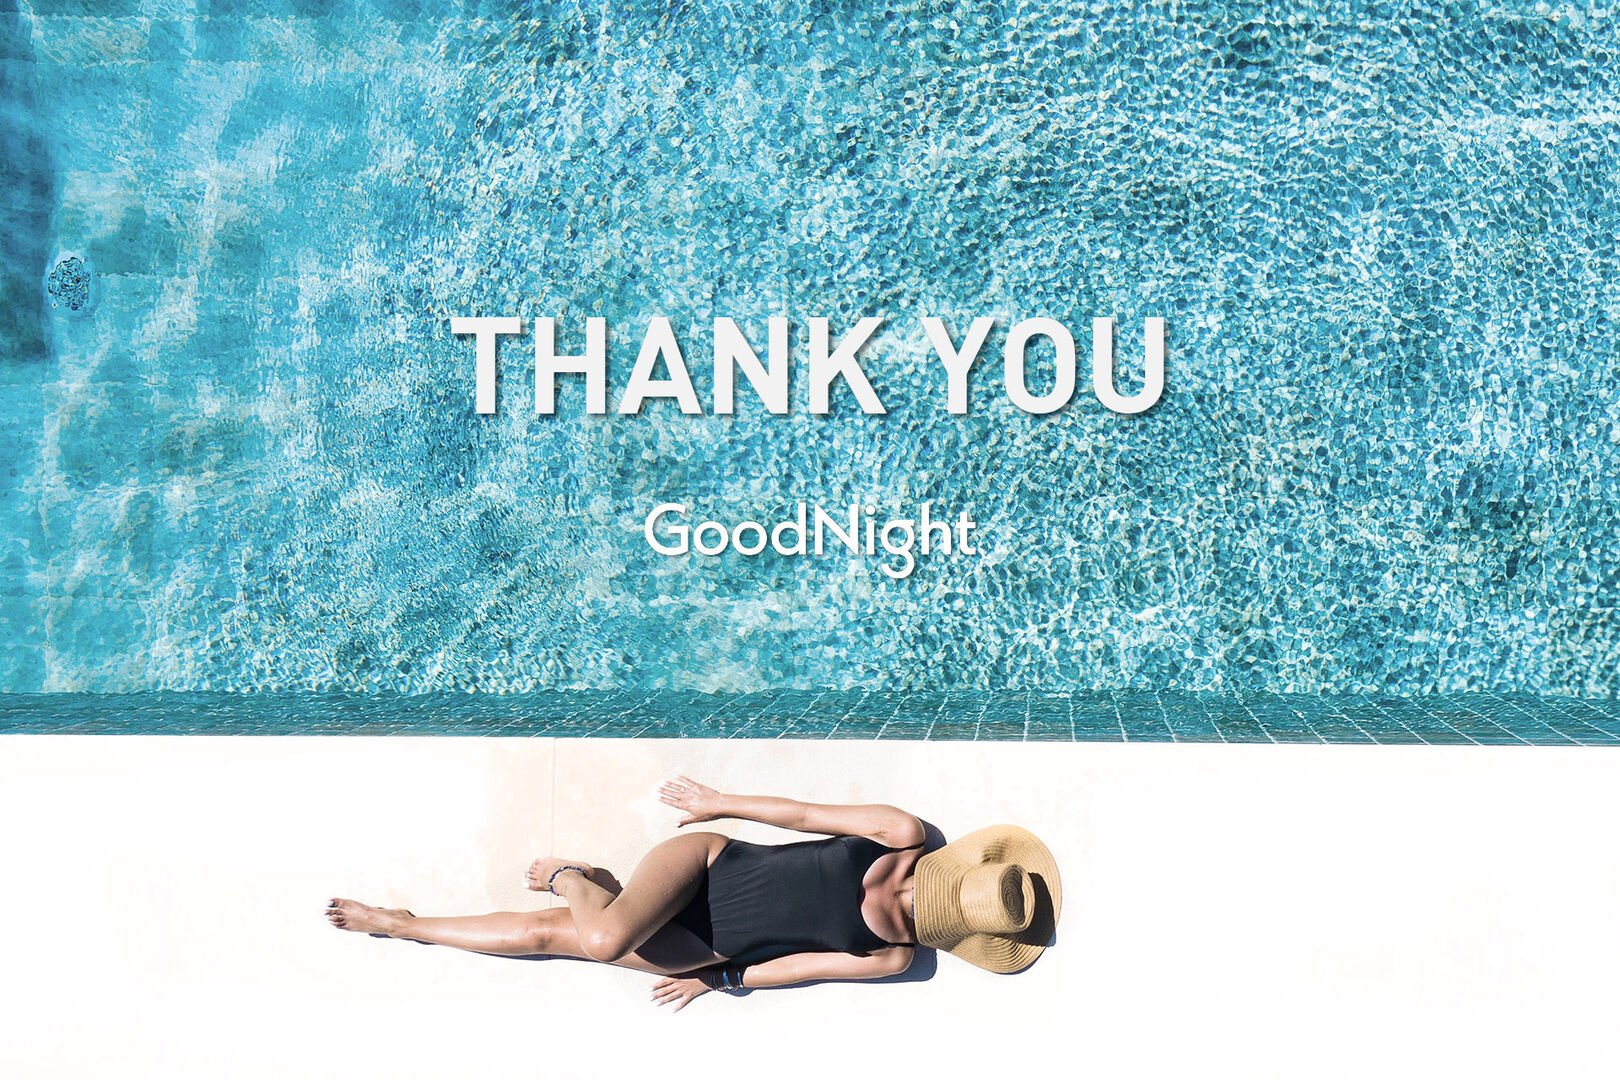 Thank you for inquiring with Goodnight Stay. We look forward to hosting you on your visit.